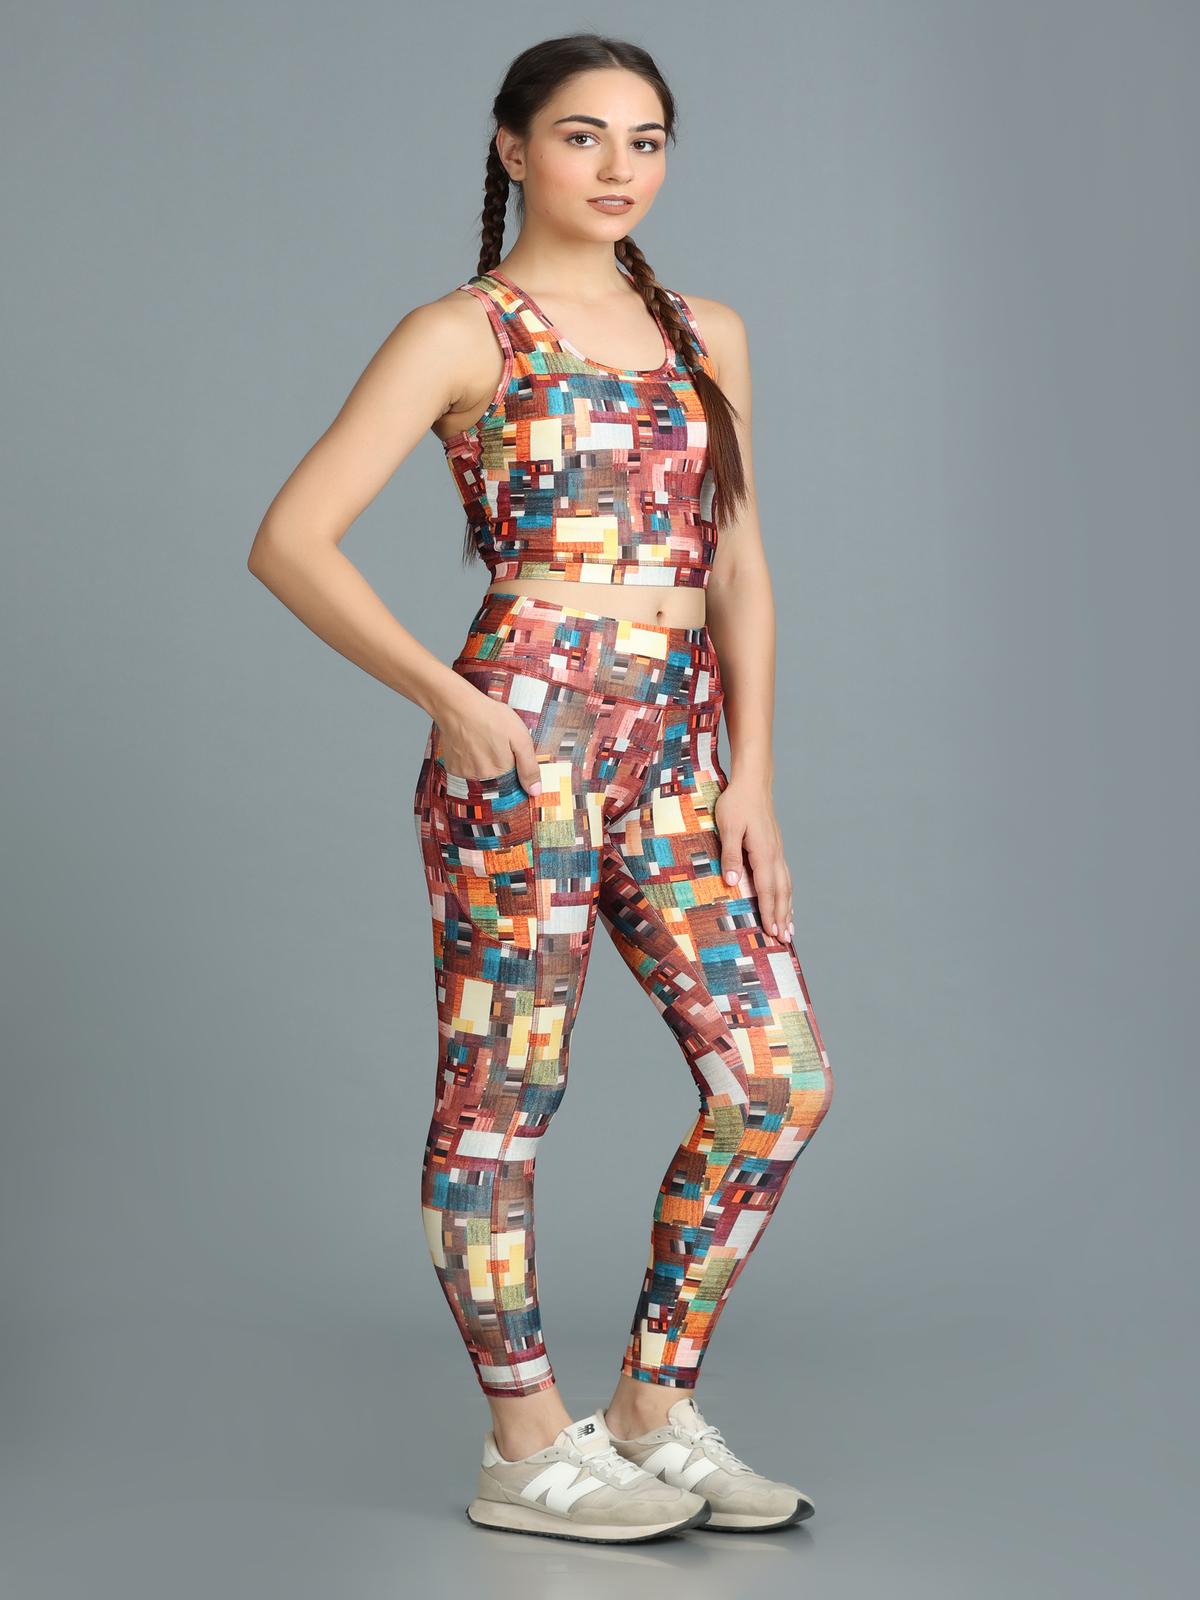 Stylish Printed Co-ord Activewear Leggings and Padded Sports Top Set - Zara